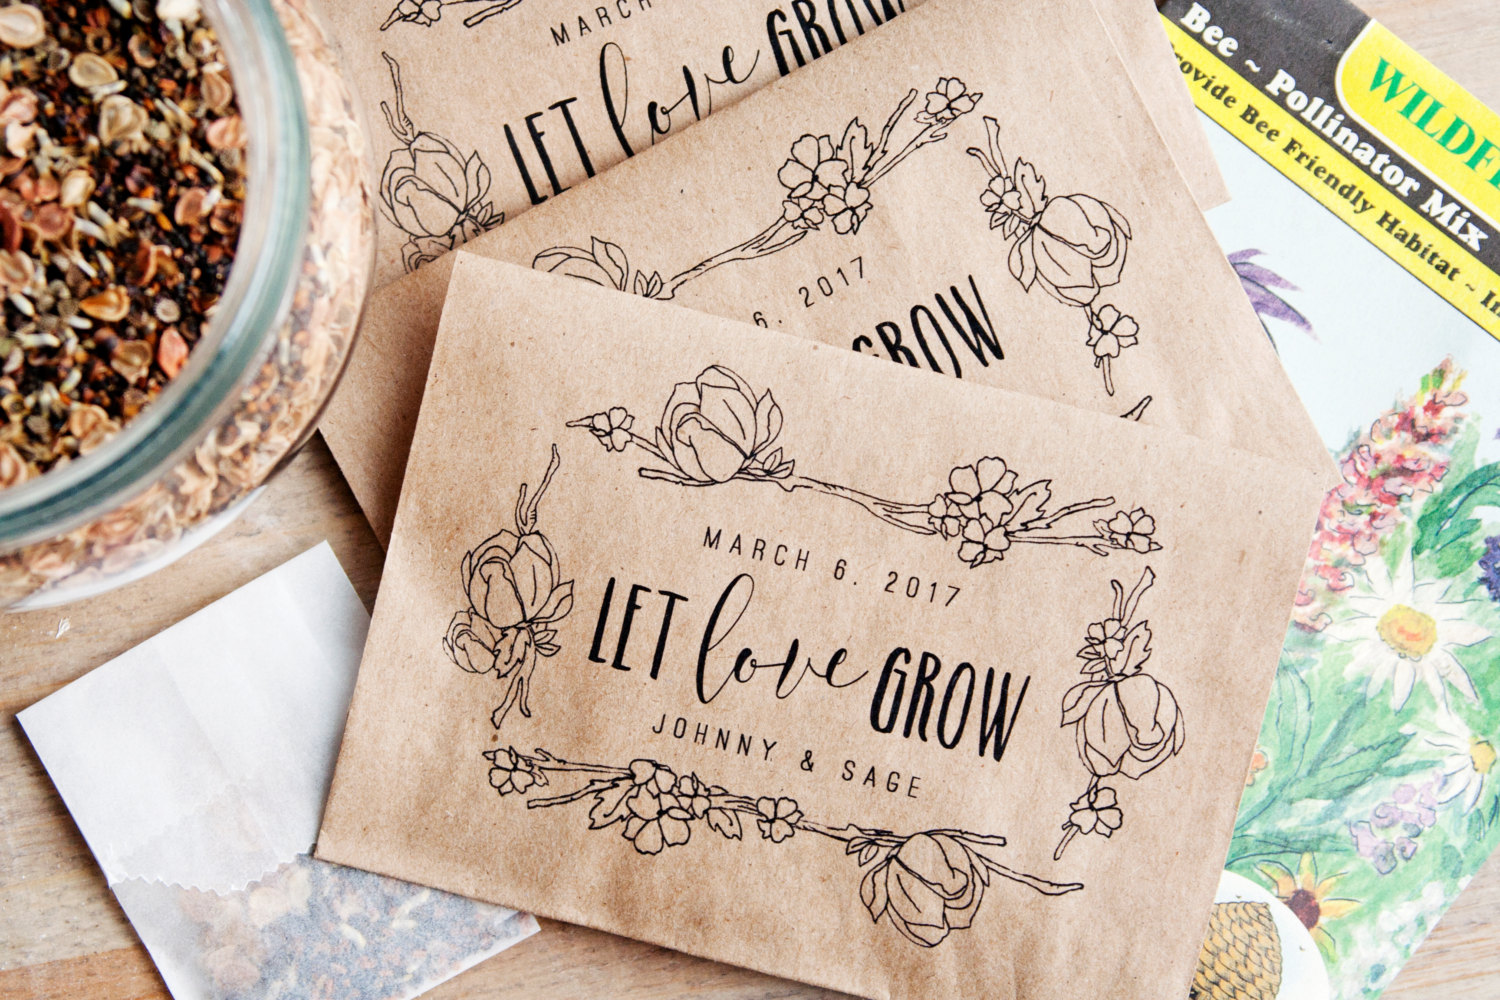 Where to Buy Seed Packet Favors for Weddings | by Mavora | via https://emmalinebride.com/favors/seed-packet-favors-for-weddings/